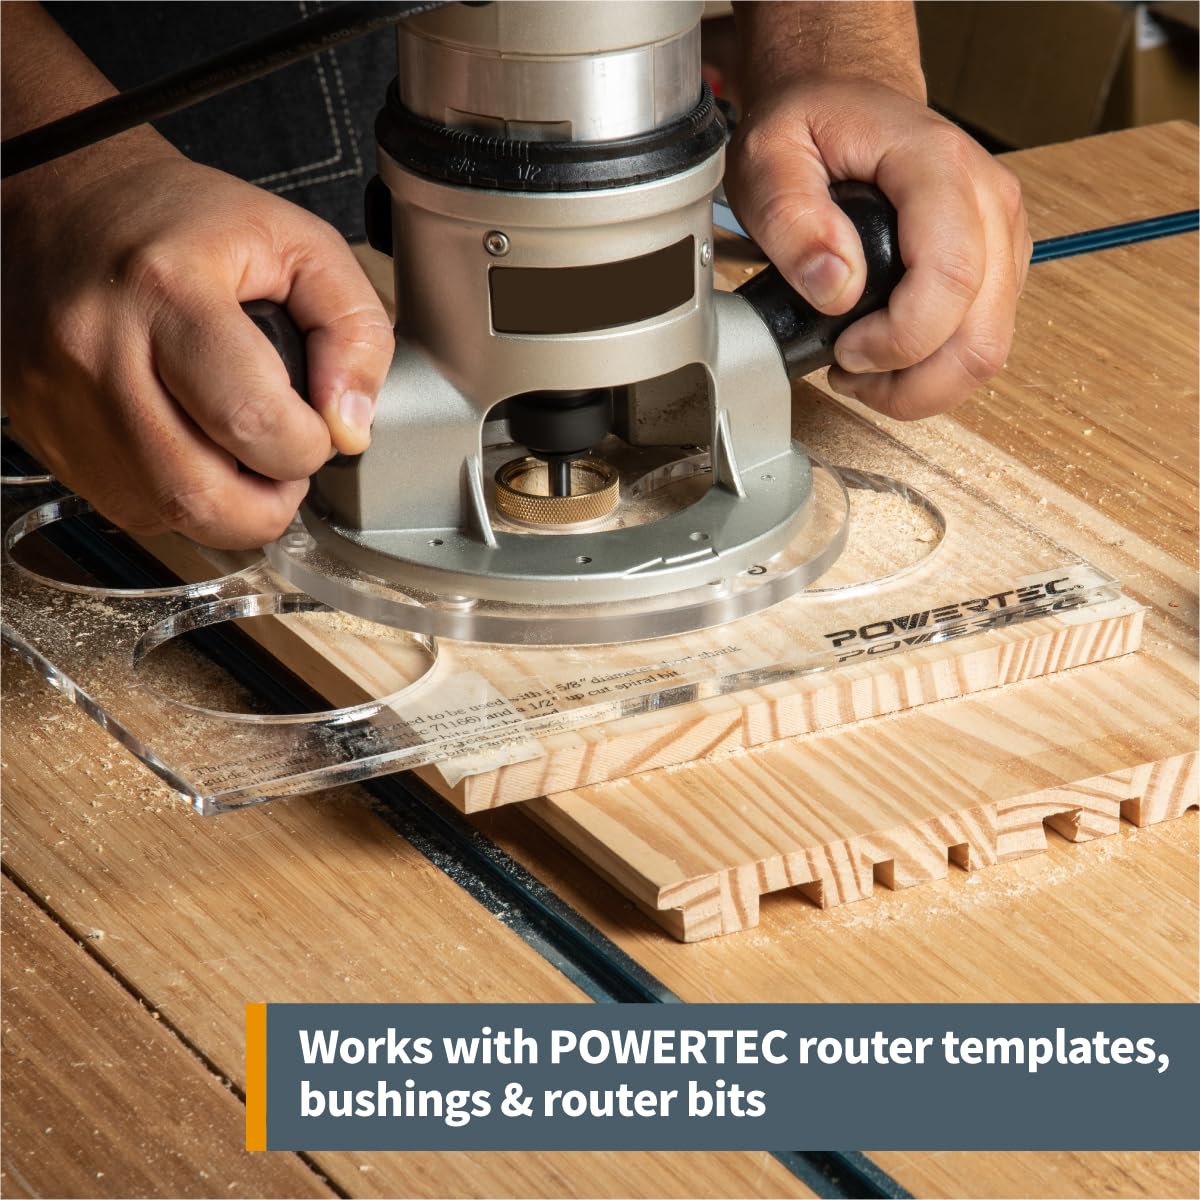 POWERTEC 71381 Dia 5-3/4" Clear Acrylic Offset Router Base Plate with Screws and Multiple Pre Drilled Holes for Trim Routers, Fits Bosch, DeWalt,